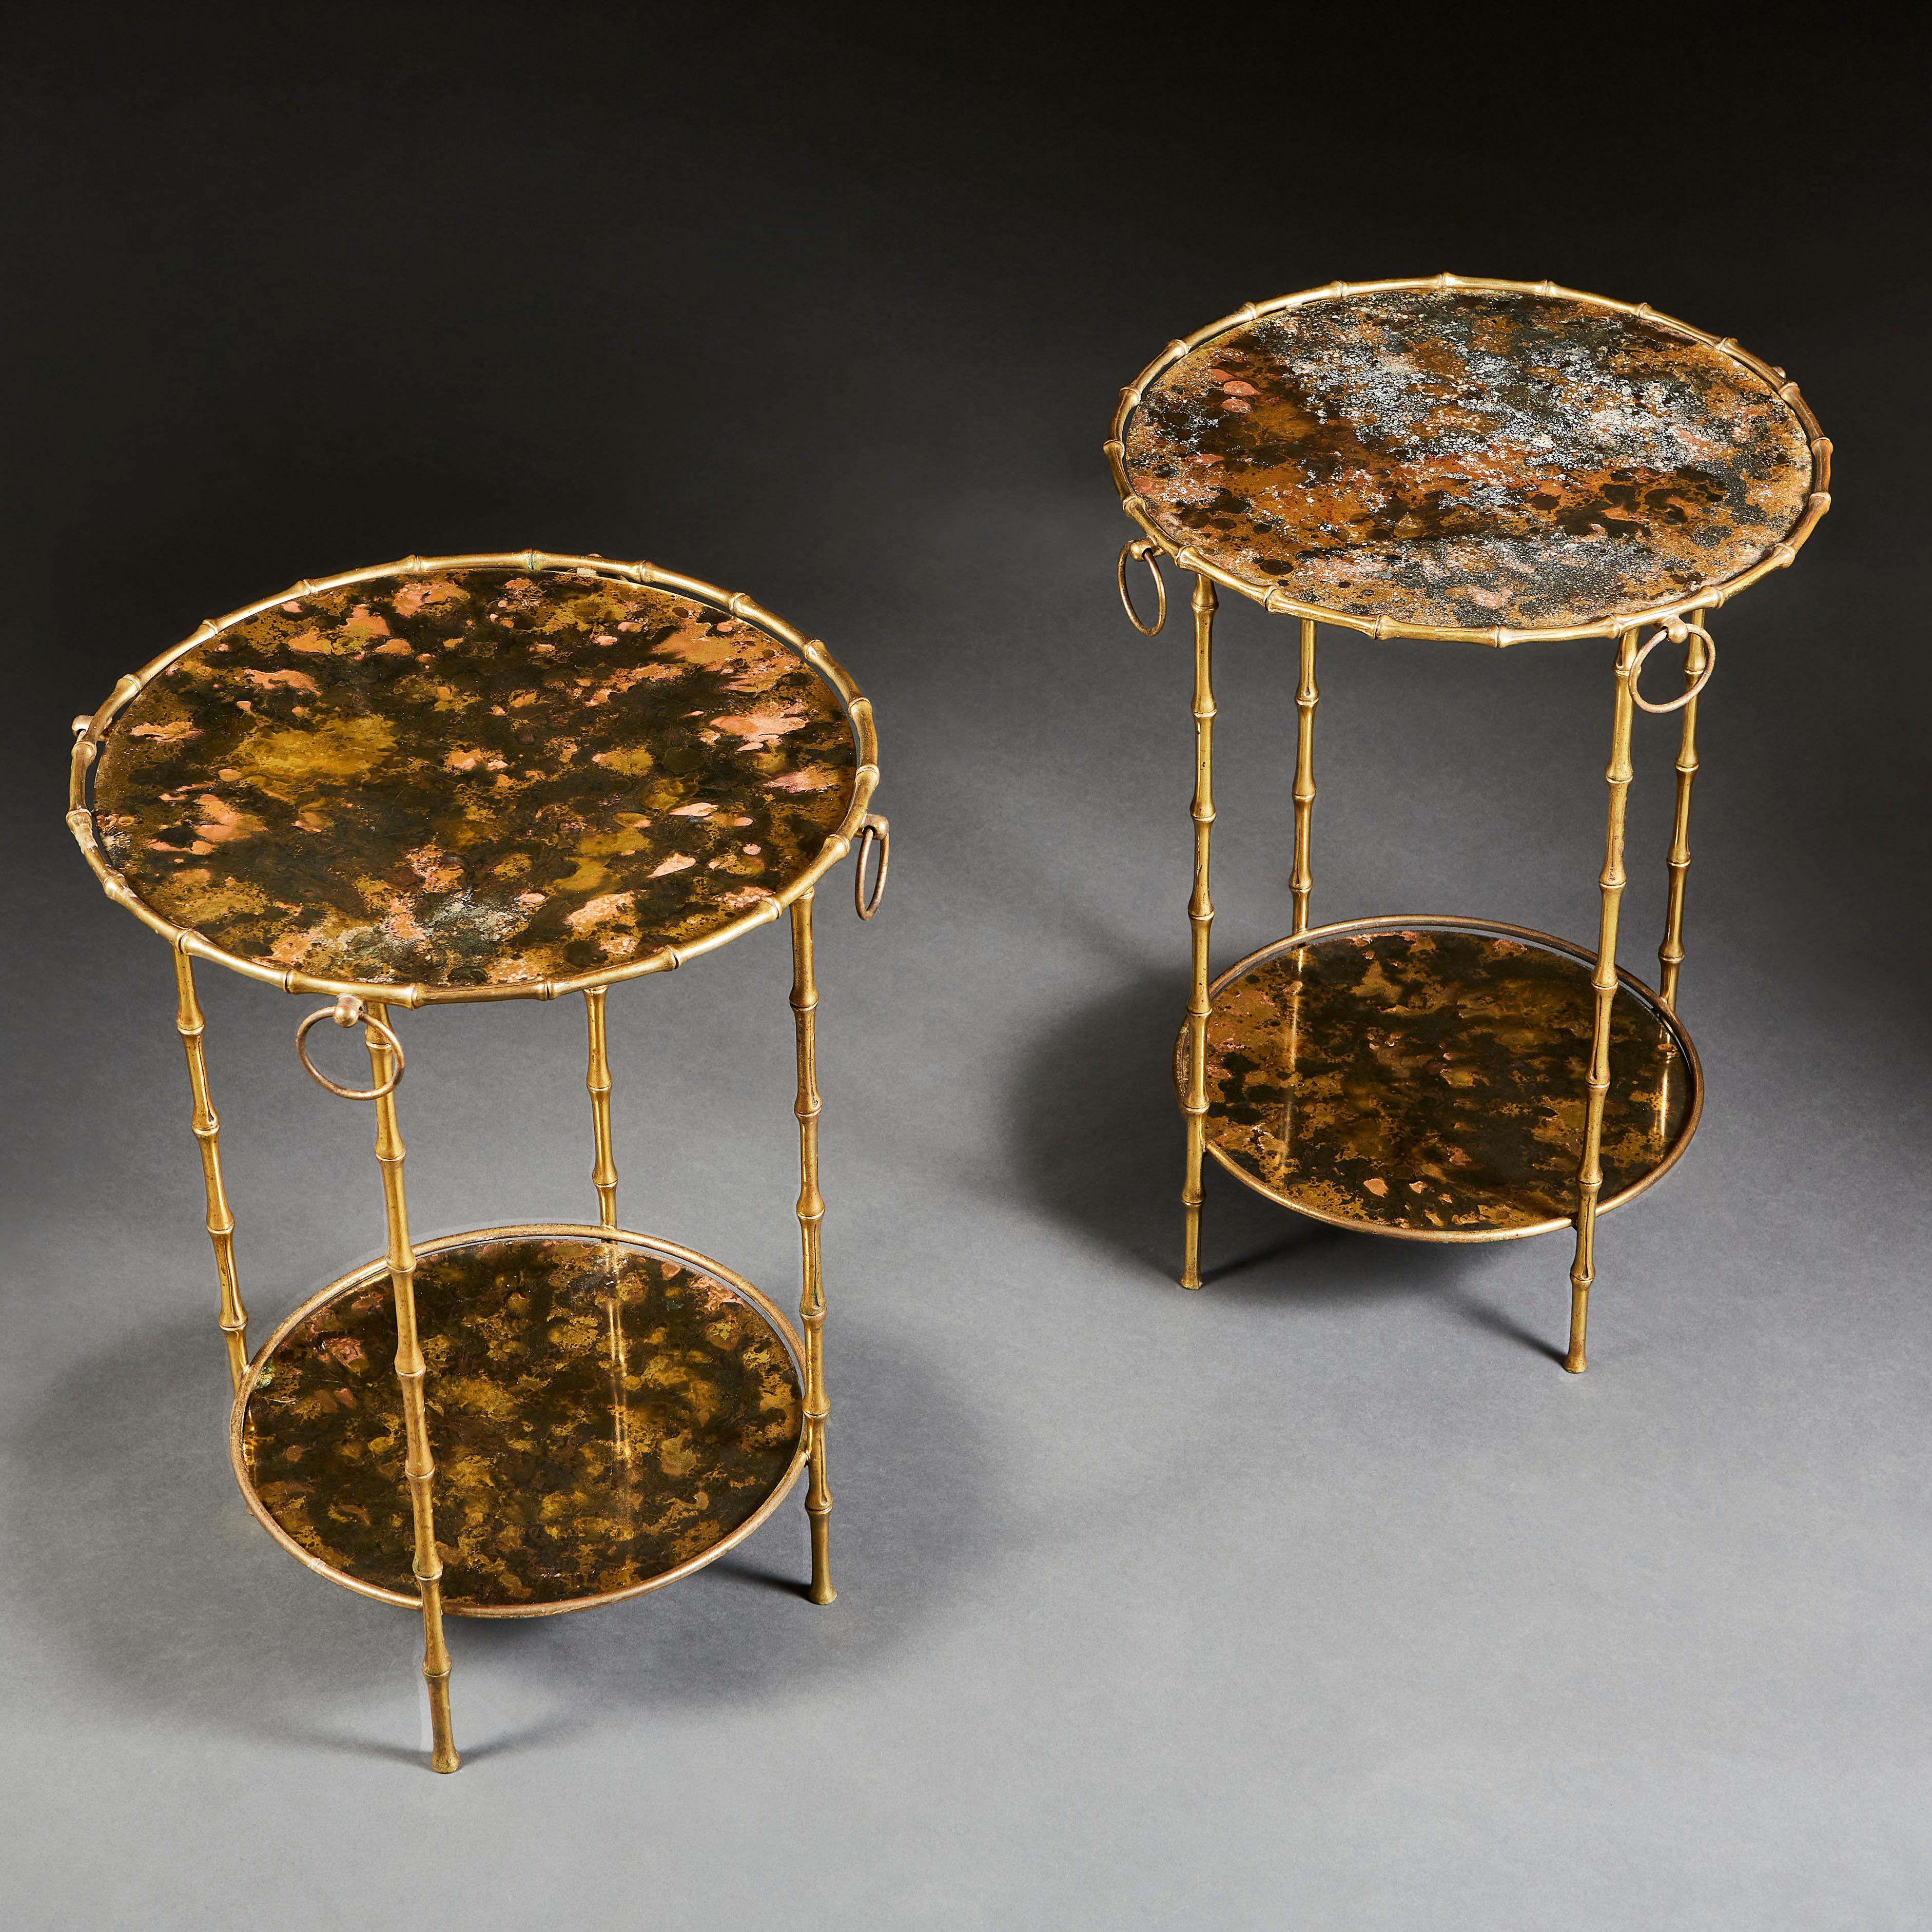 A pair of circular bamboo simulated brass étagères, the tops with patinated metal under glass, with four loop handles punctuating the edges of top tier.